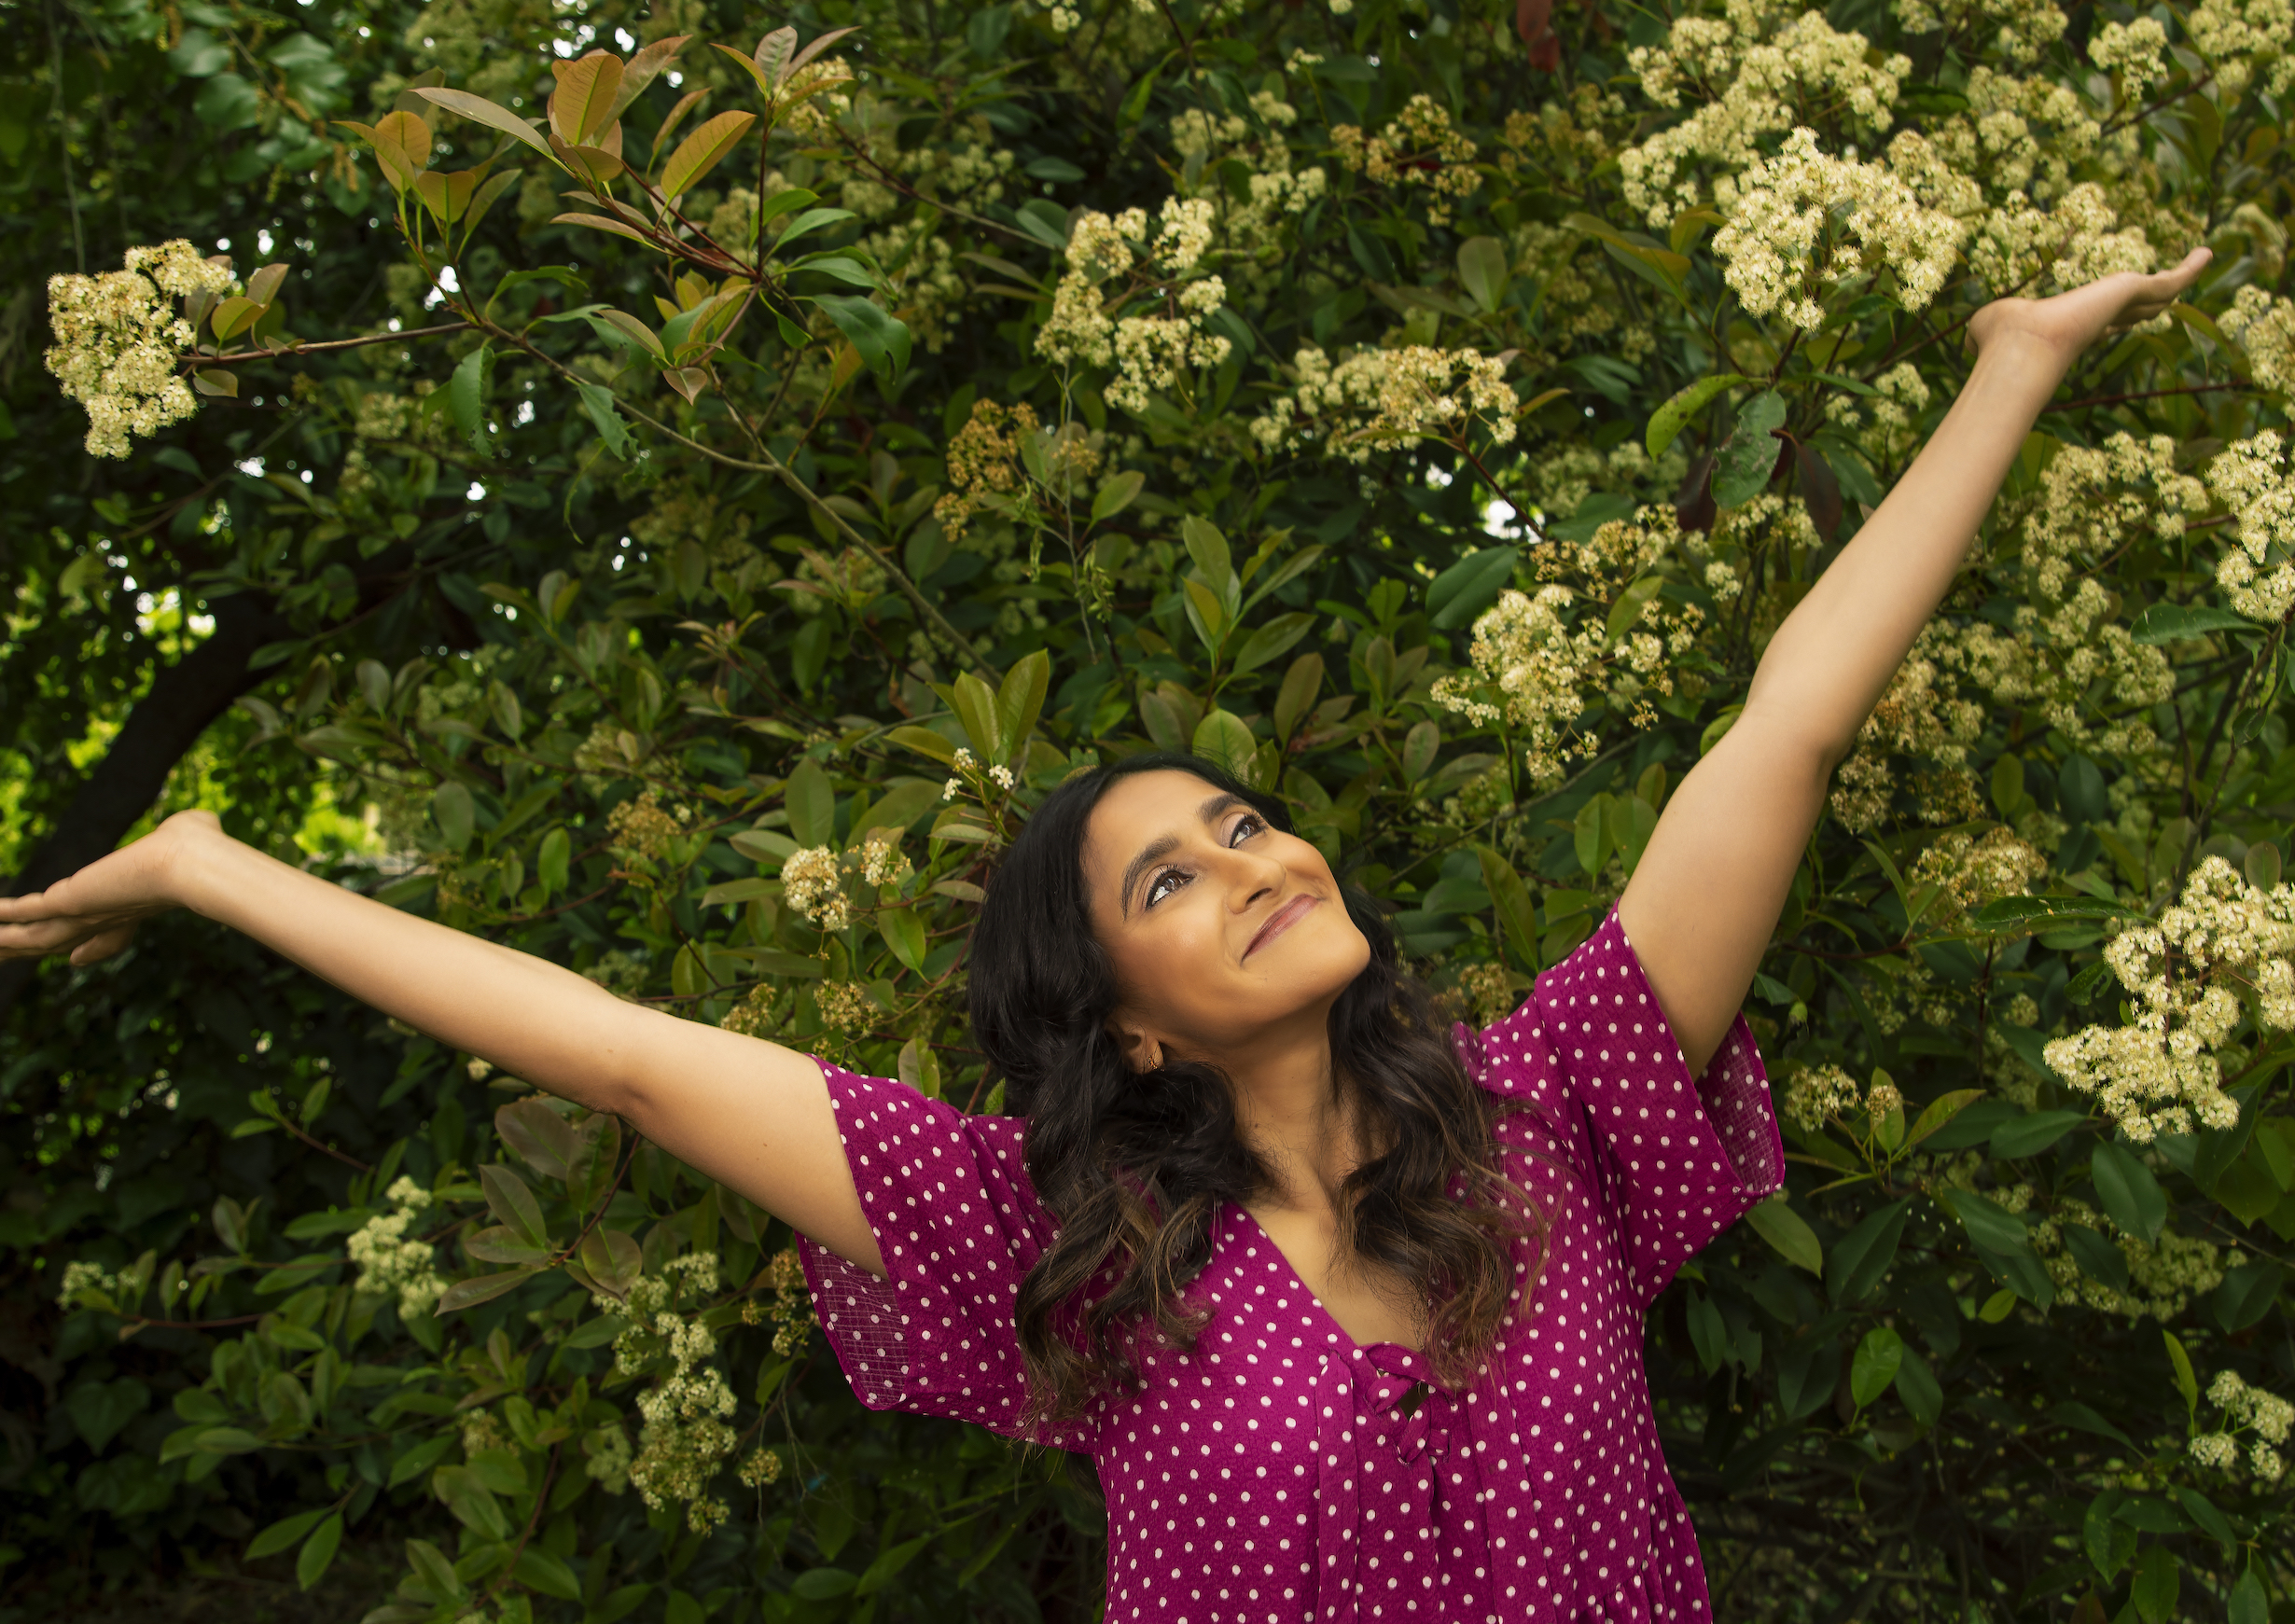 Aparna Nancherla with her arms outstretched in front of flowers